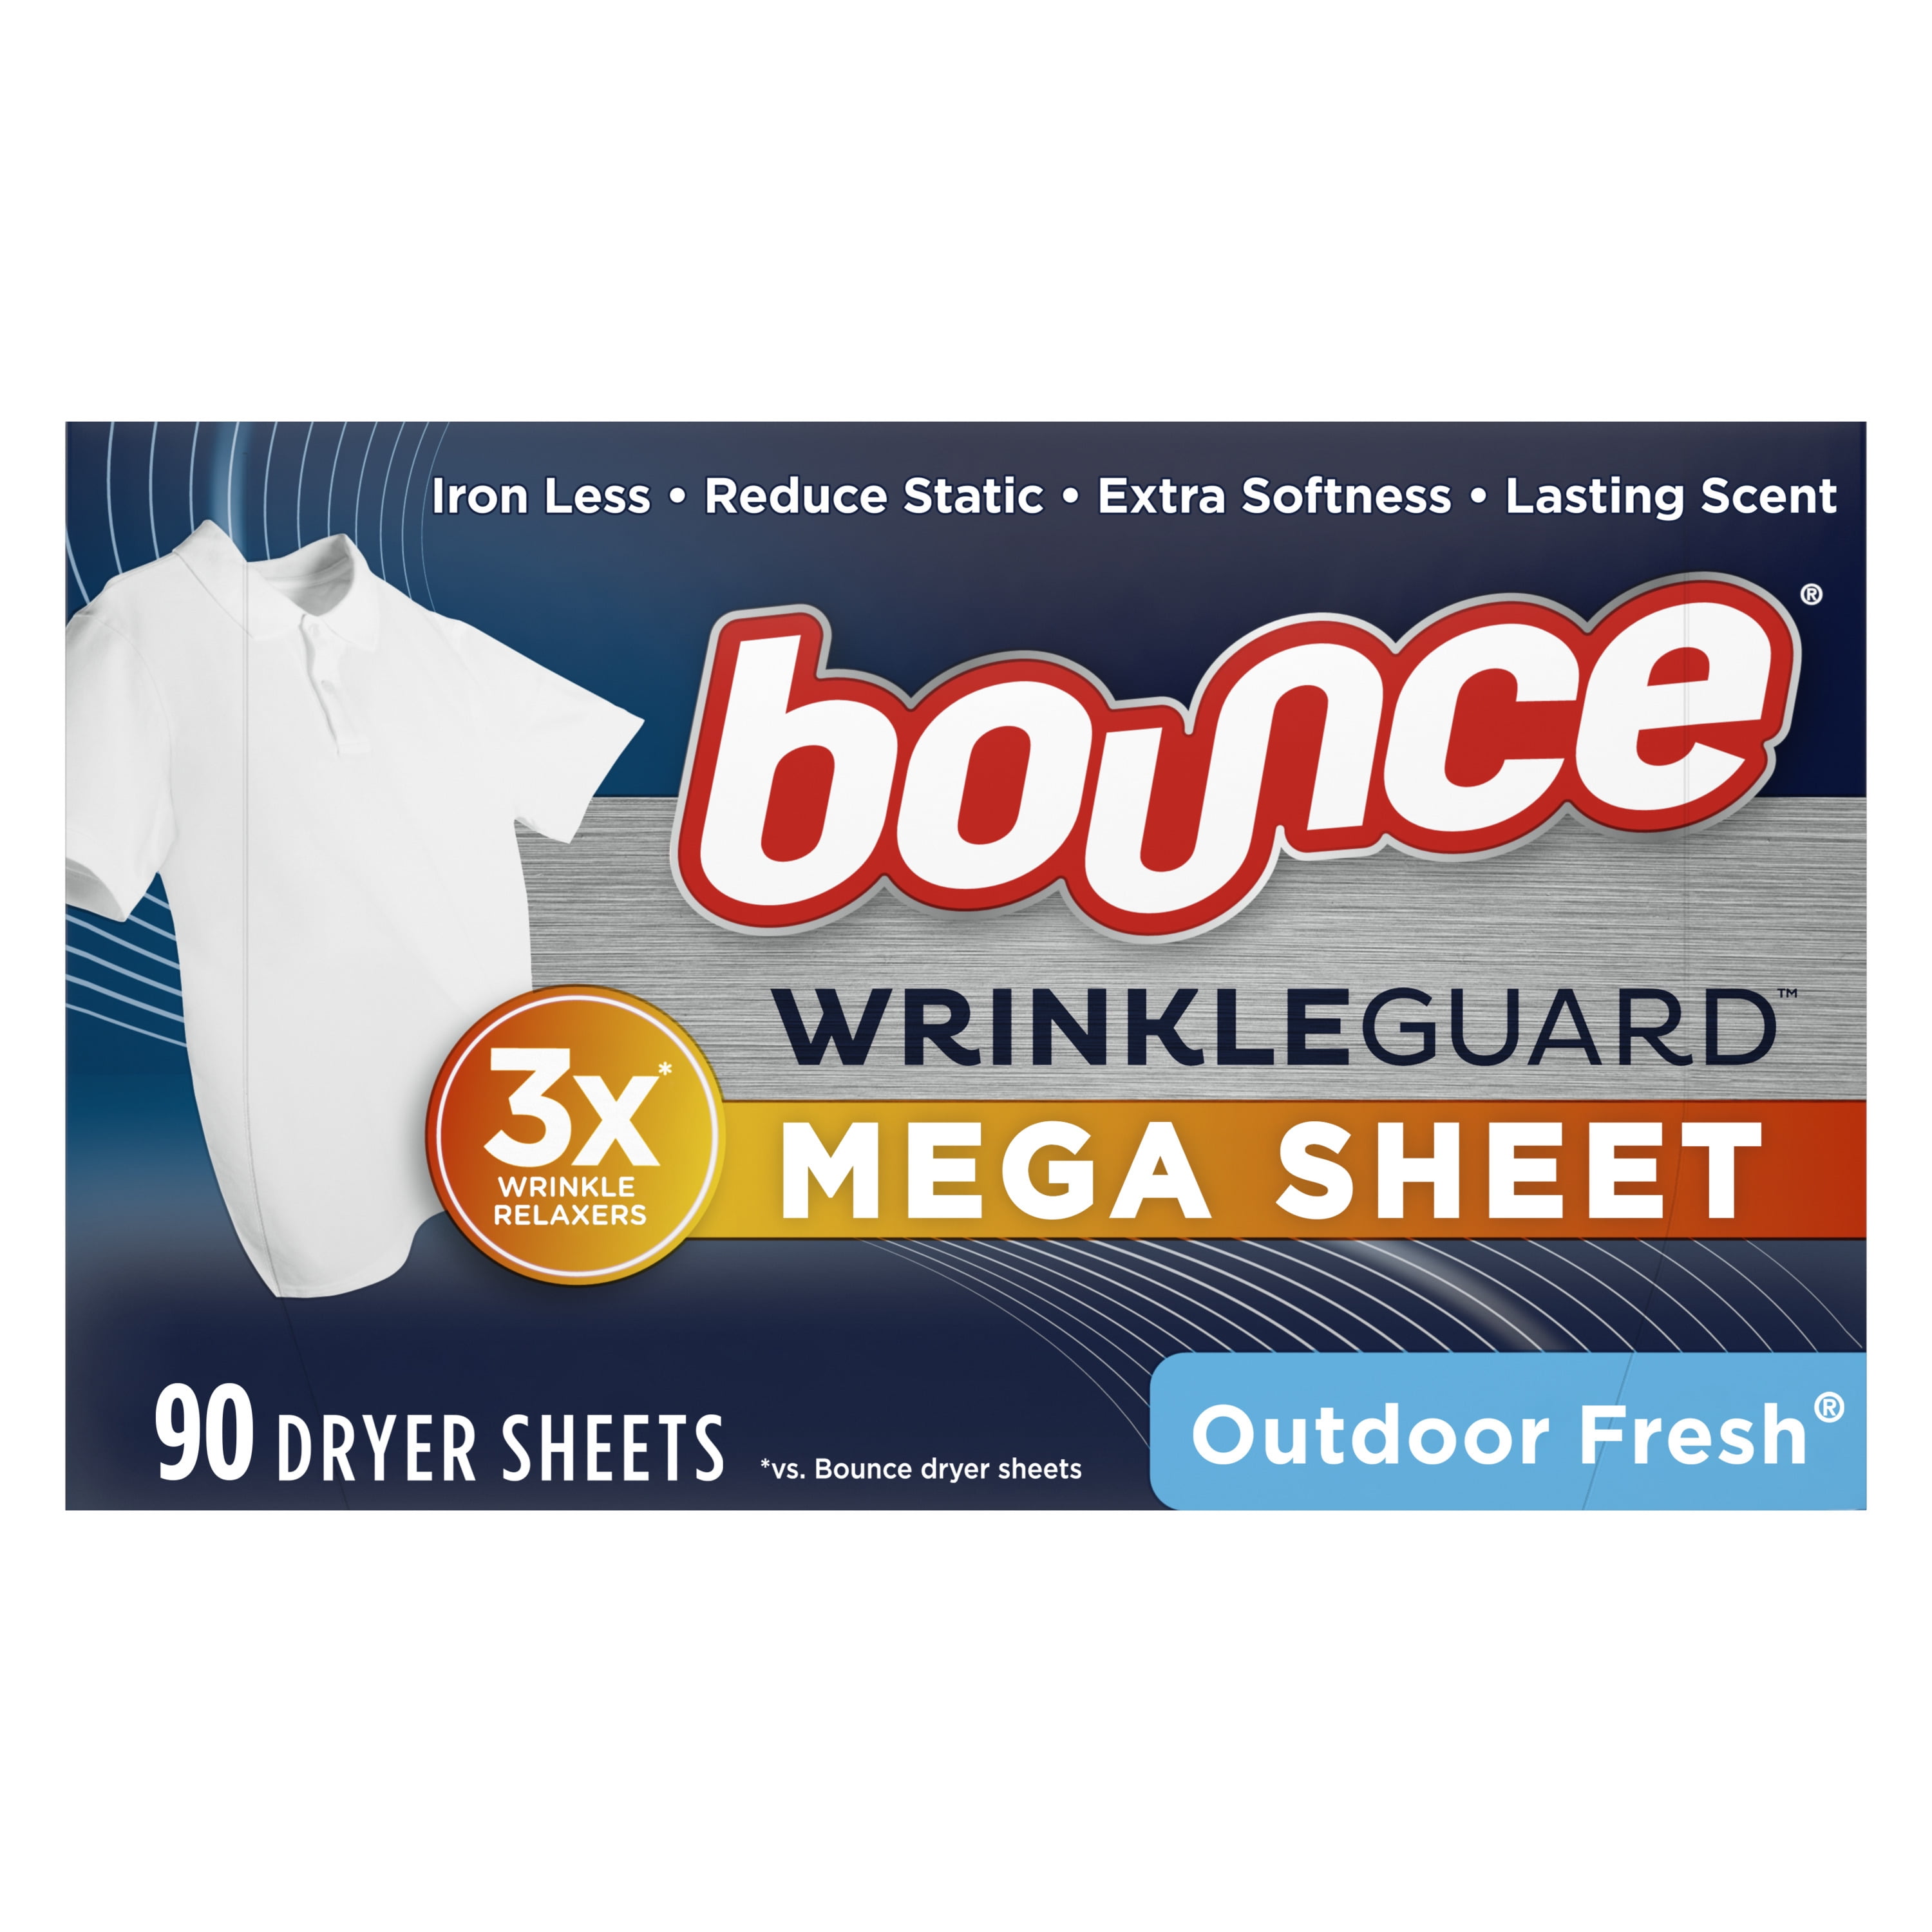 Bounce WrinkleGuard Mega Dryer Sheets, 90 Count, Wrinkle Release Fabric Softener Sheets with OutdoorFresh Sent